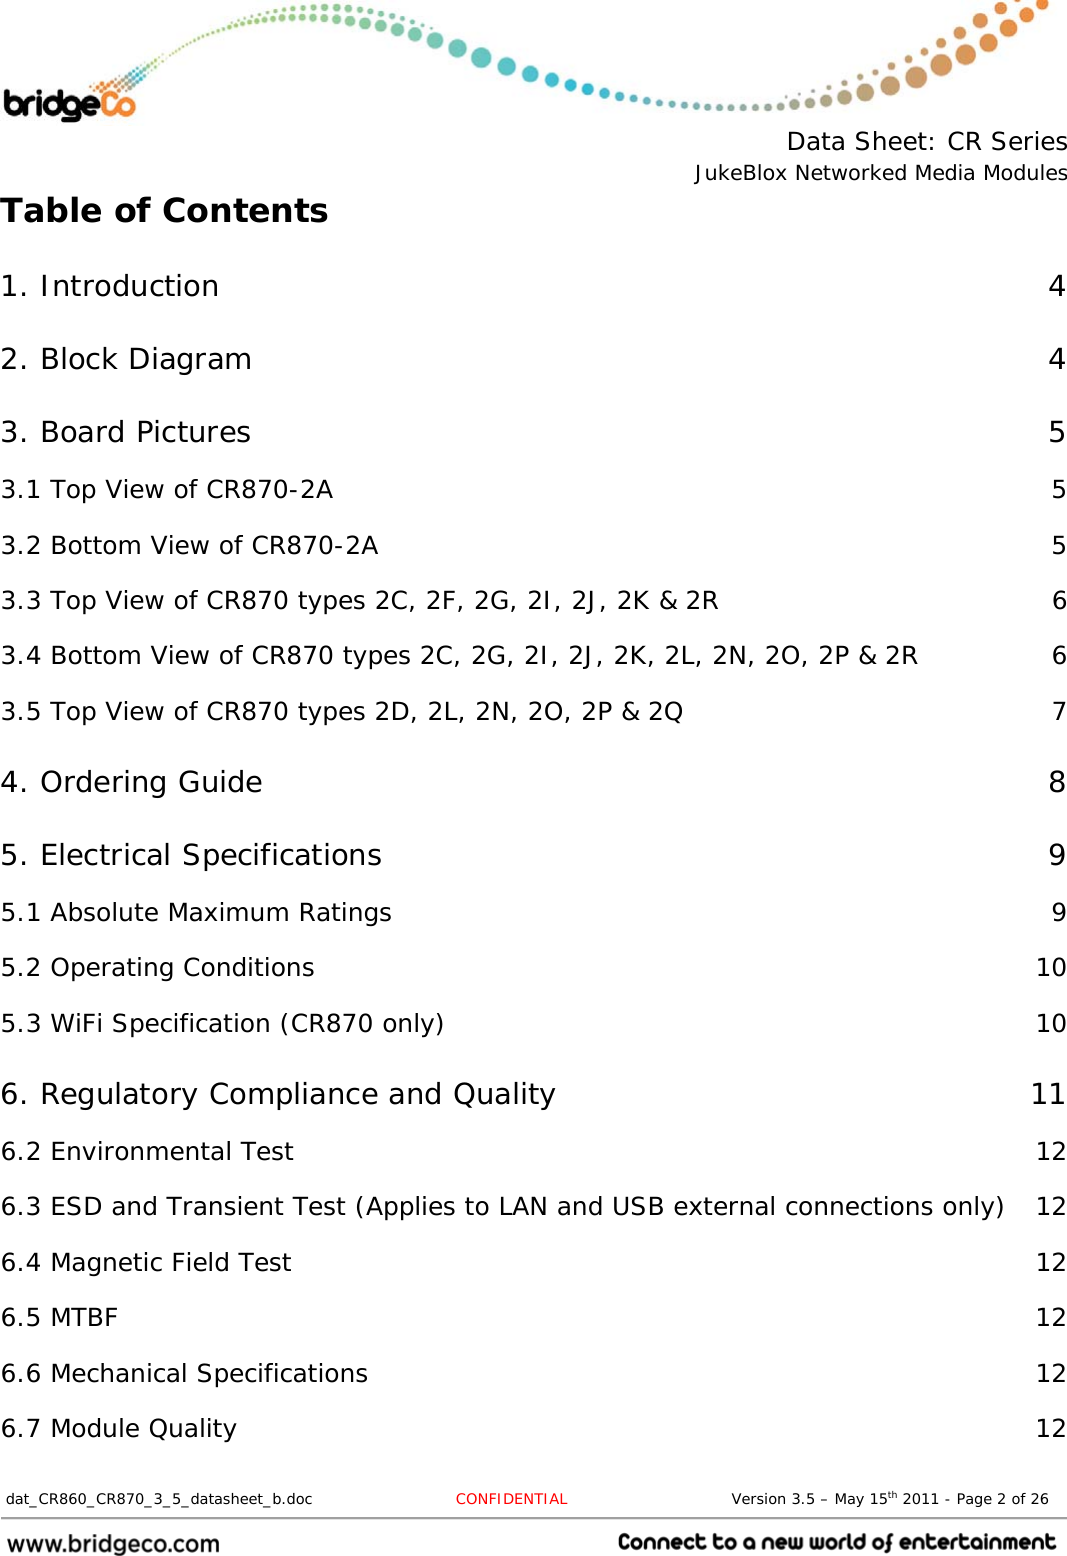  Data Sheet: CR Series JukeBlox Networked Media Modules  dat_CR860_CR870_3_5_datasheet_b.doc   CONFIDENTIAL                                Version 3.5 – May 15th 2011 - Page 2 of 26                                 Table of Contents 1. Introduction  42. Block Diagram  43. Board Pictures  53.1 Top View of CR870-2A  53.2 Bottom View of CR870-2A  53.3 Top View of CR870 types 2C, 2F, 2G, 2I, 2J, 2K &amp; 2R  63.4 Bottom View of CR870 types 2C, 2G, 2I, 2J, 2K, 2L, 2N, 2O, 2P &amp; 2R  63.5 Top View of CR870 types 2D, 2L, 2N, 2O, 2P &amp; 2Q  74. Ordering Guide  85. Electrical Specifications  95.1 Absolute Maximum Ratings  95.2 Operating Conditions  105.3 WiFi Specification (CR870 only)  106. Regulatory Compliance and Quality  116.2 Environmental Test  126.3 ESD and Transient Test (Applies to LAN and USB external connections only)  126.4 Magnetic Field Test  126.5 MTBF  126.6 Mechanical Specifications  126.7 Module Quality  12